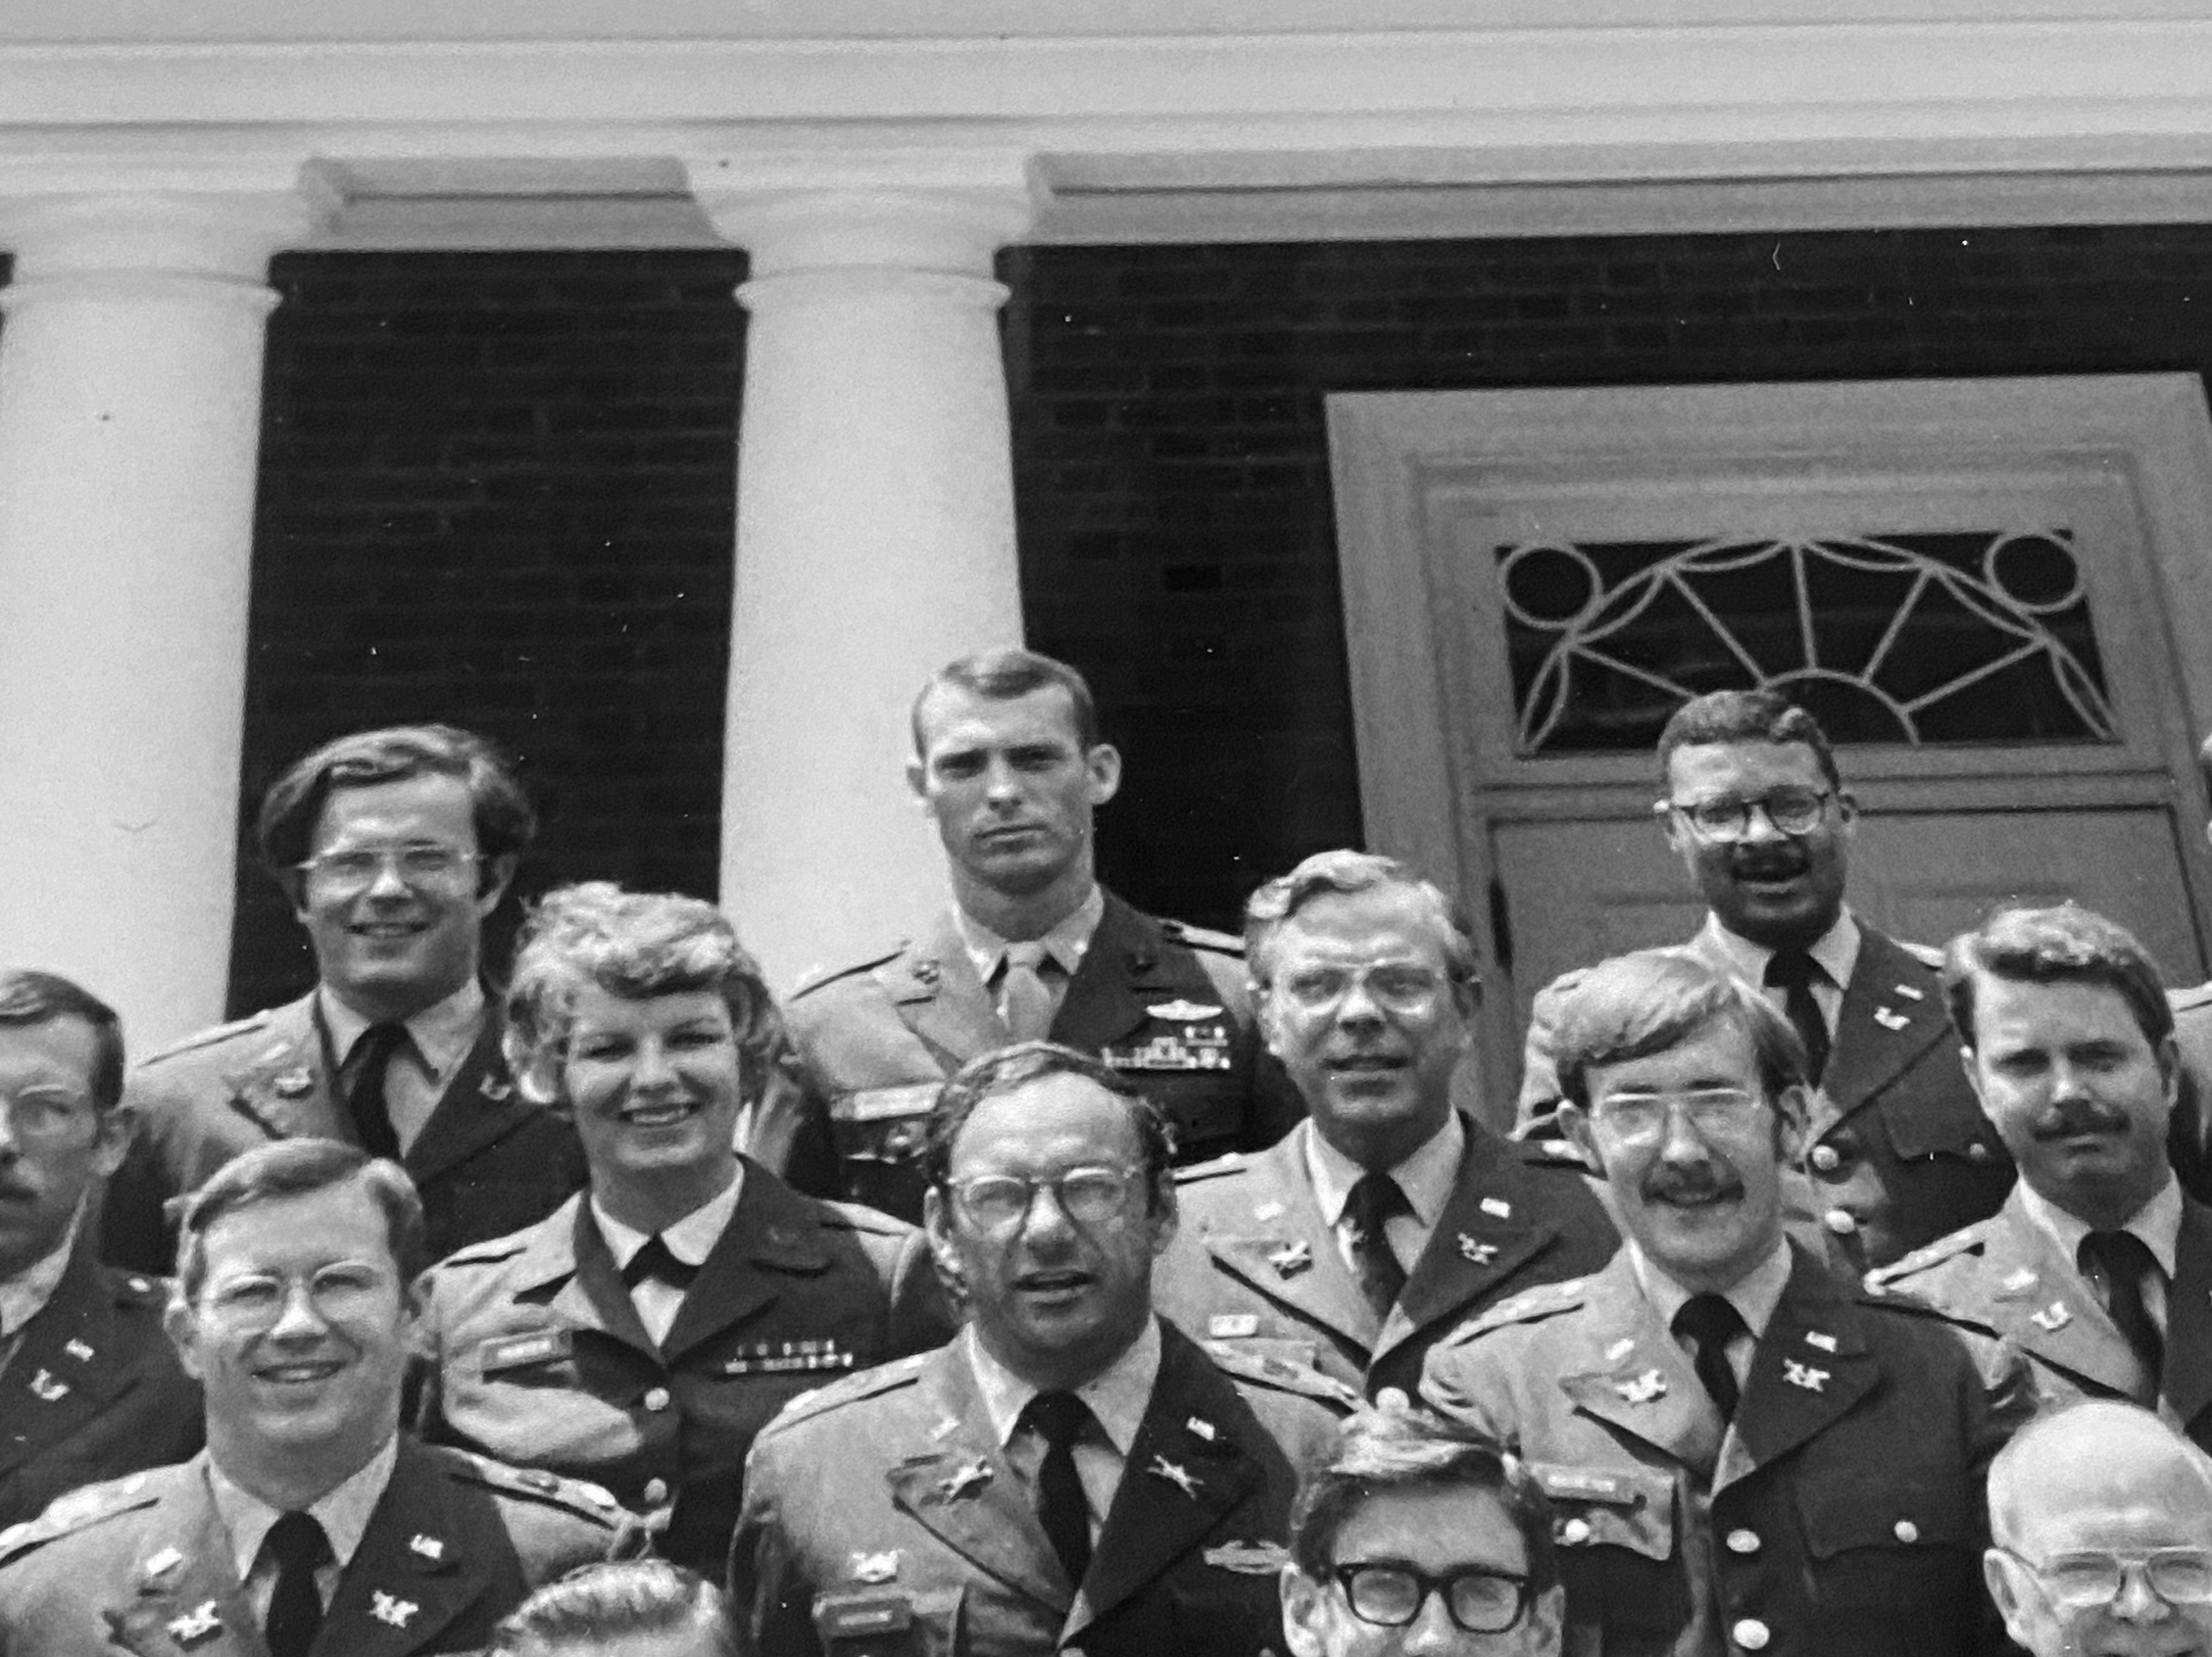 Major W. Hays Parks (back row, center) in 1974 while
        on faculty at The Judge Advocate General’s School in
        Charlottesville, Virginia. (Photo courtesy of The Judge
        Advocate General’s Legal Center and School)